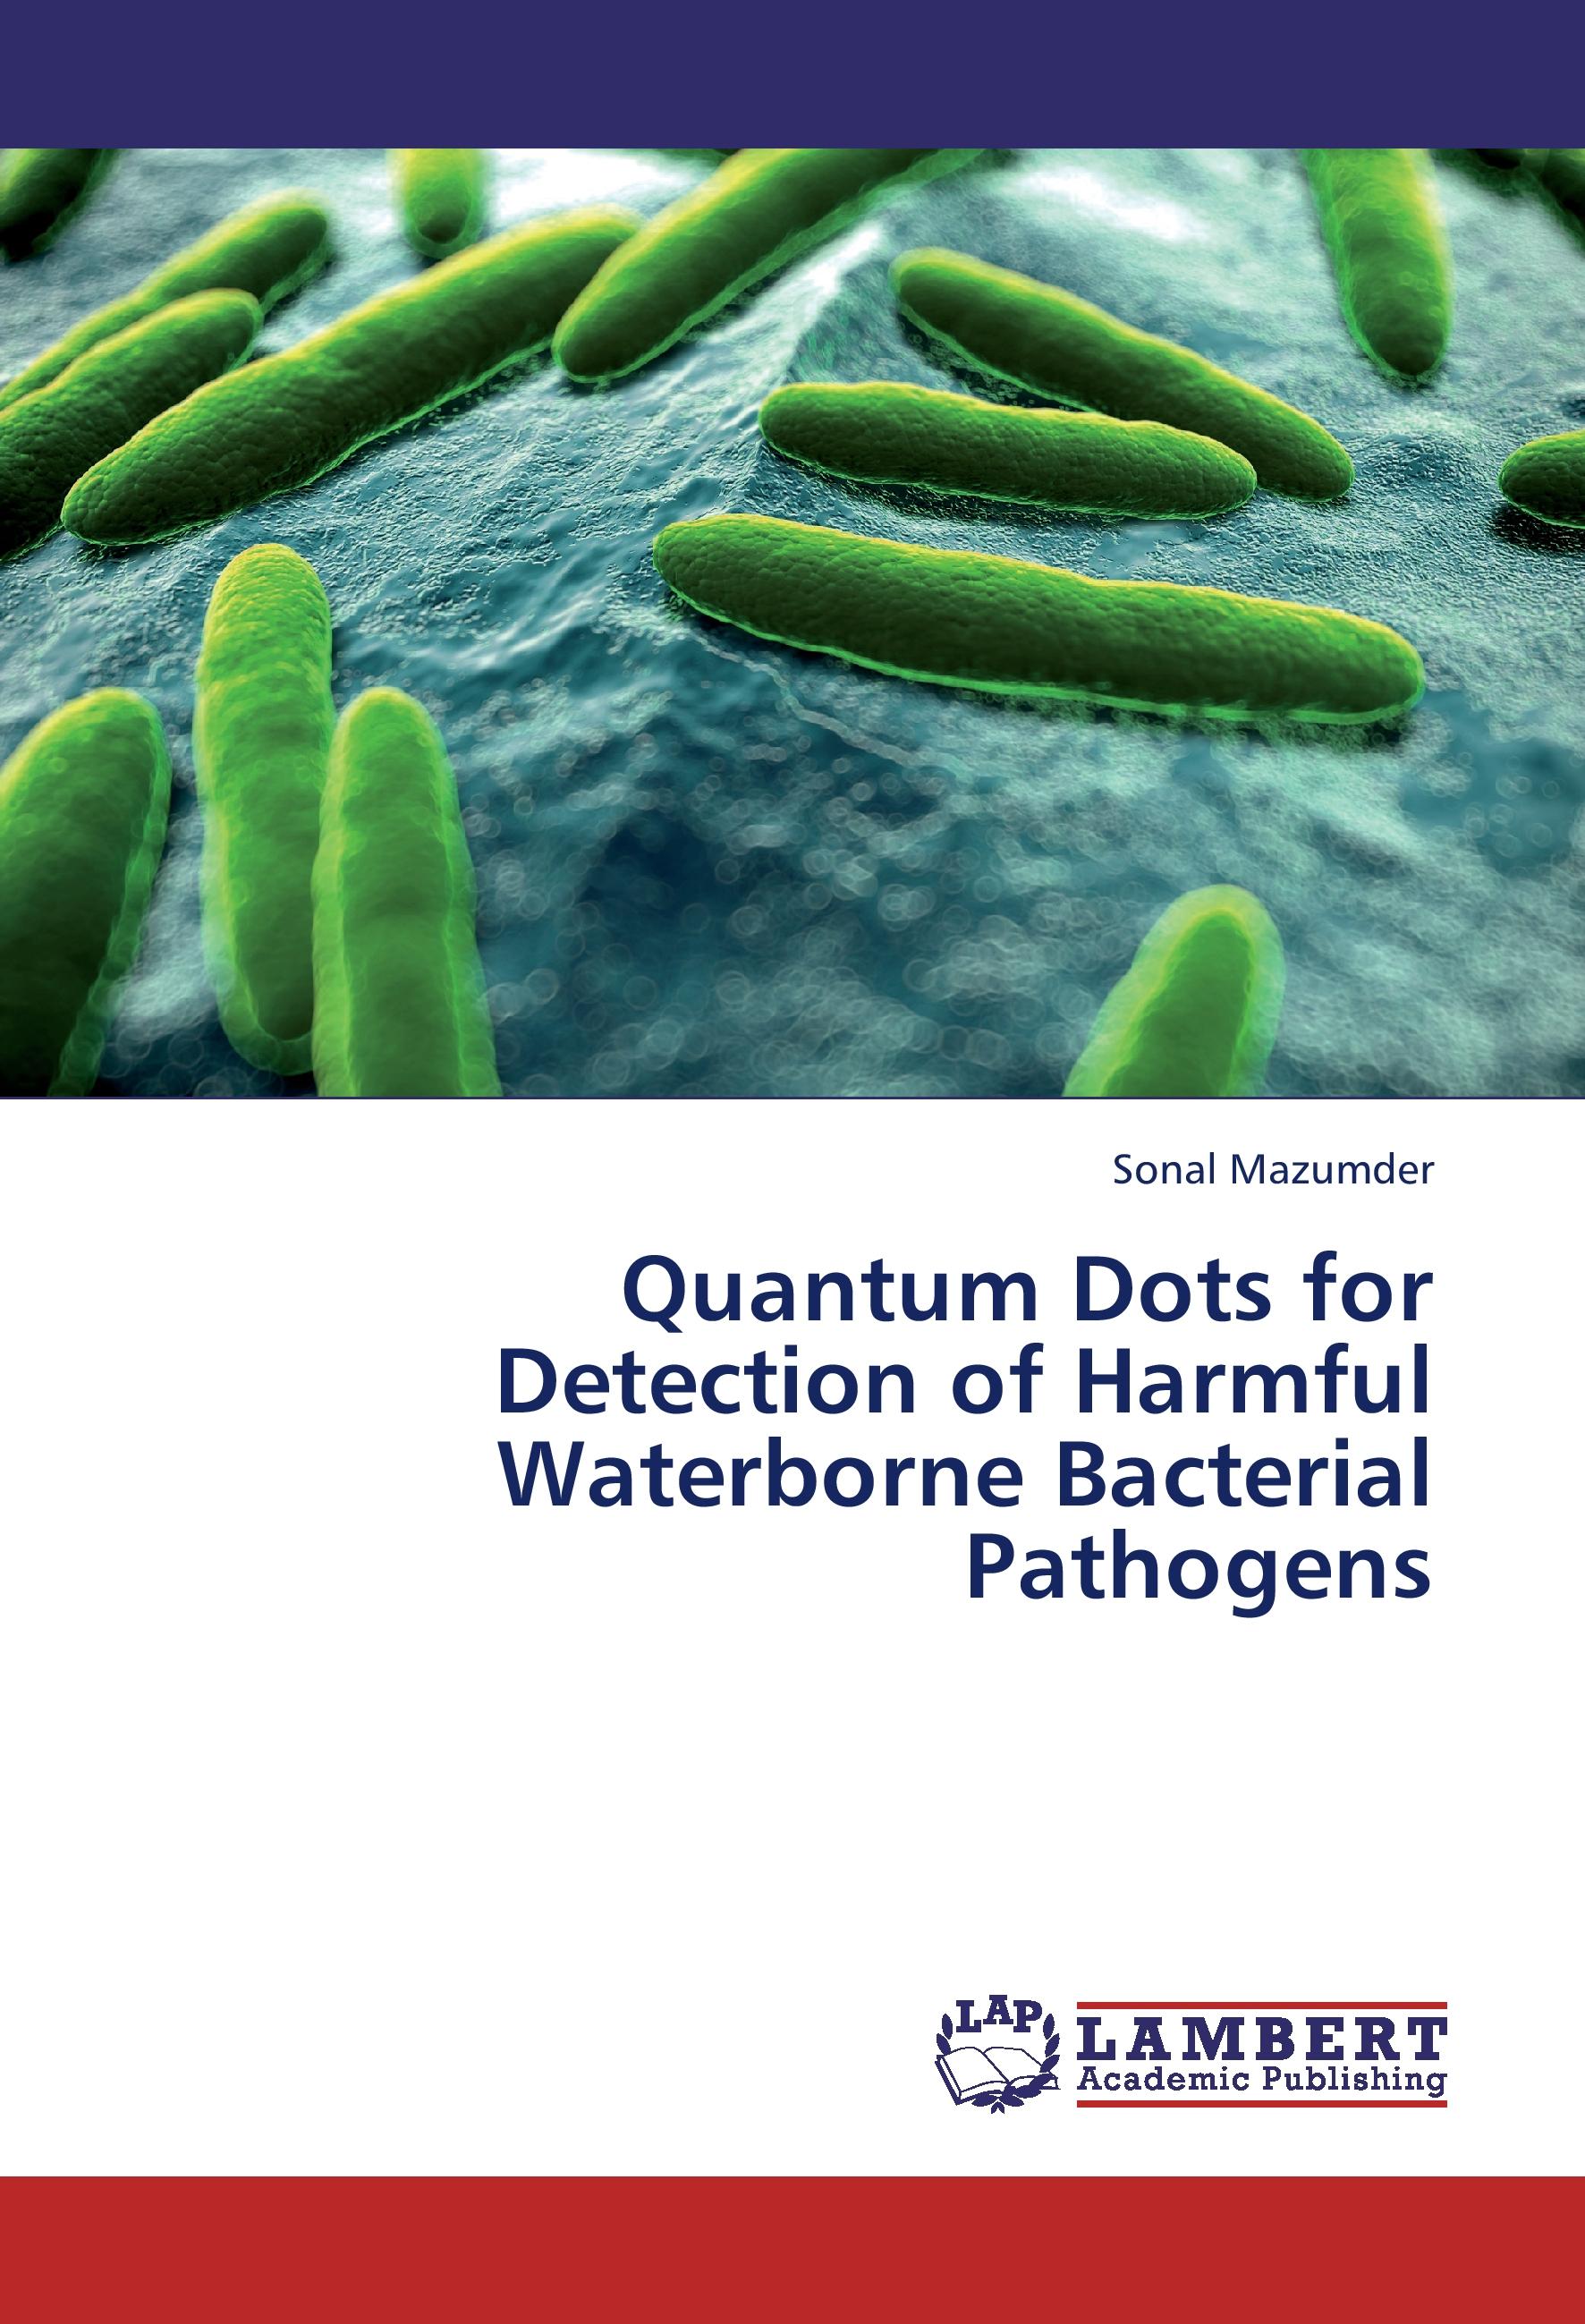 Quantum Dots for Detection of Harmful Waterborne Bacterial Pathogens - Sonal Mazumder